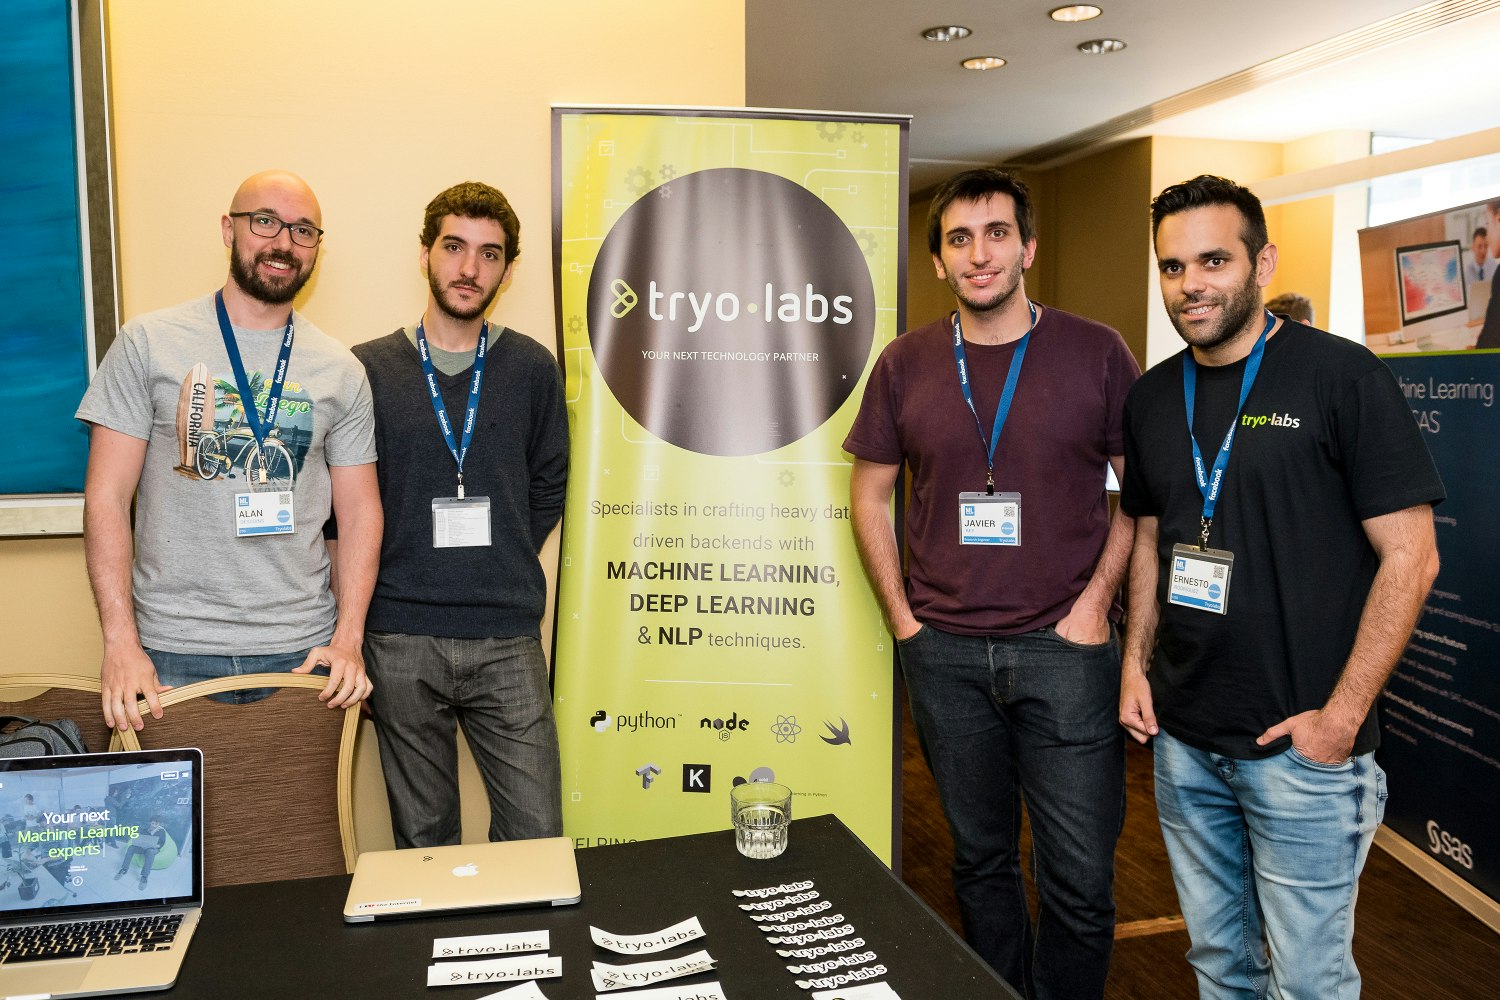 Tryolabs booth MLconf SF